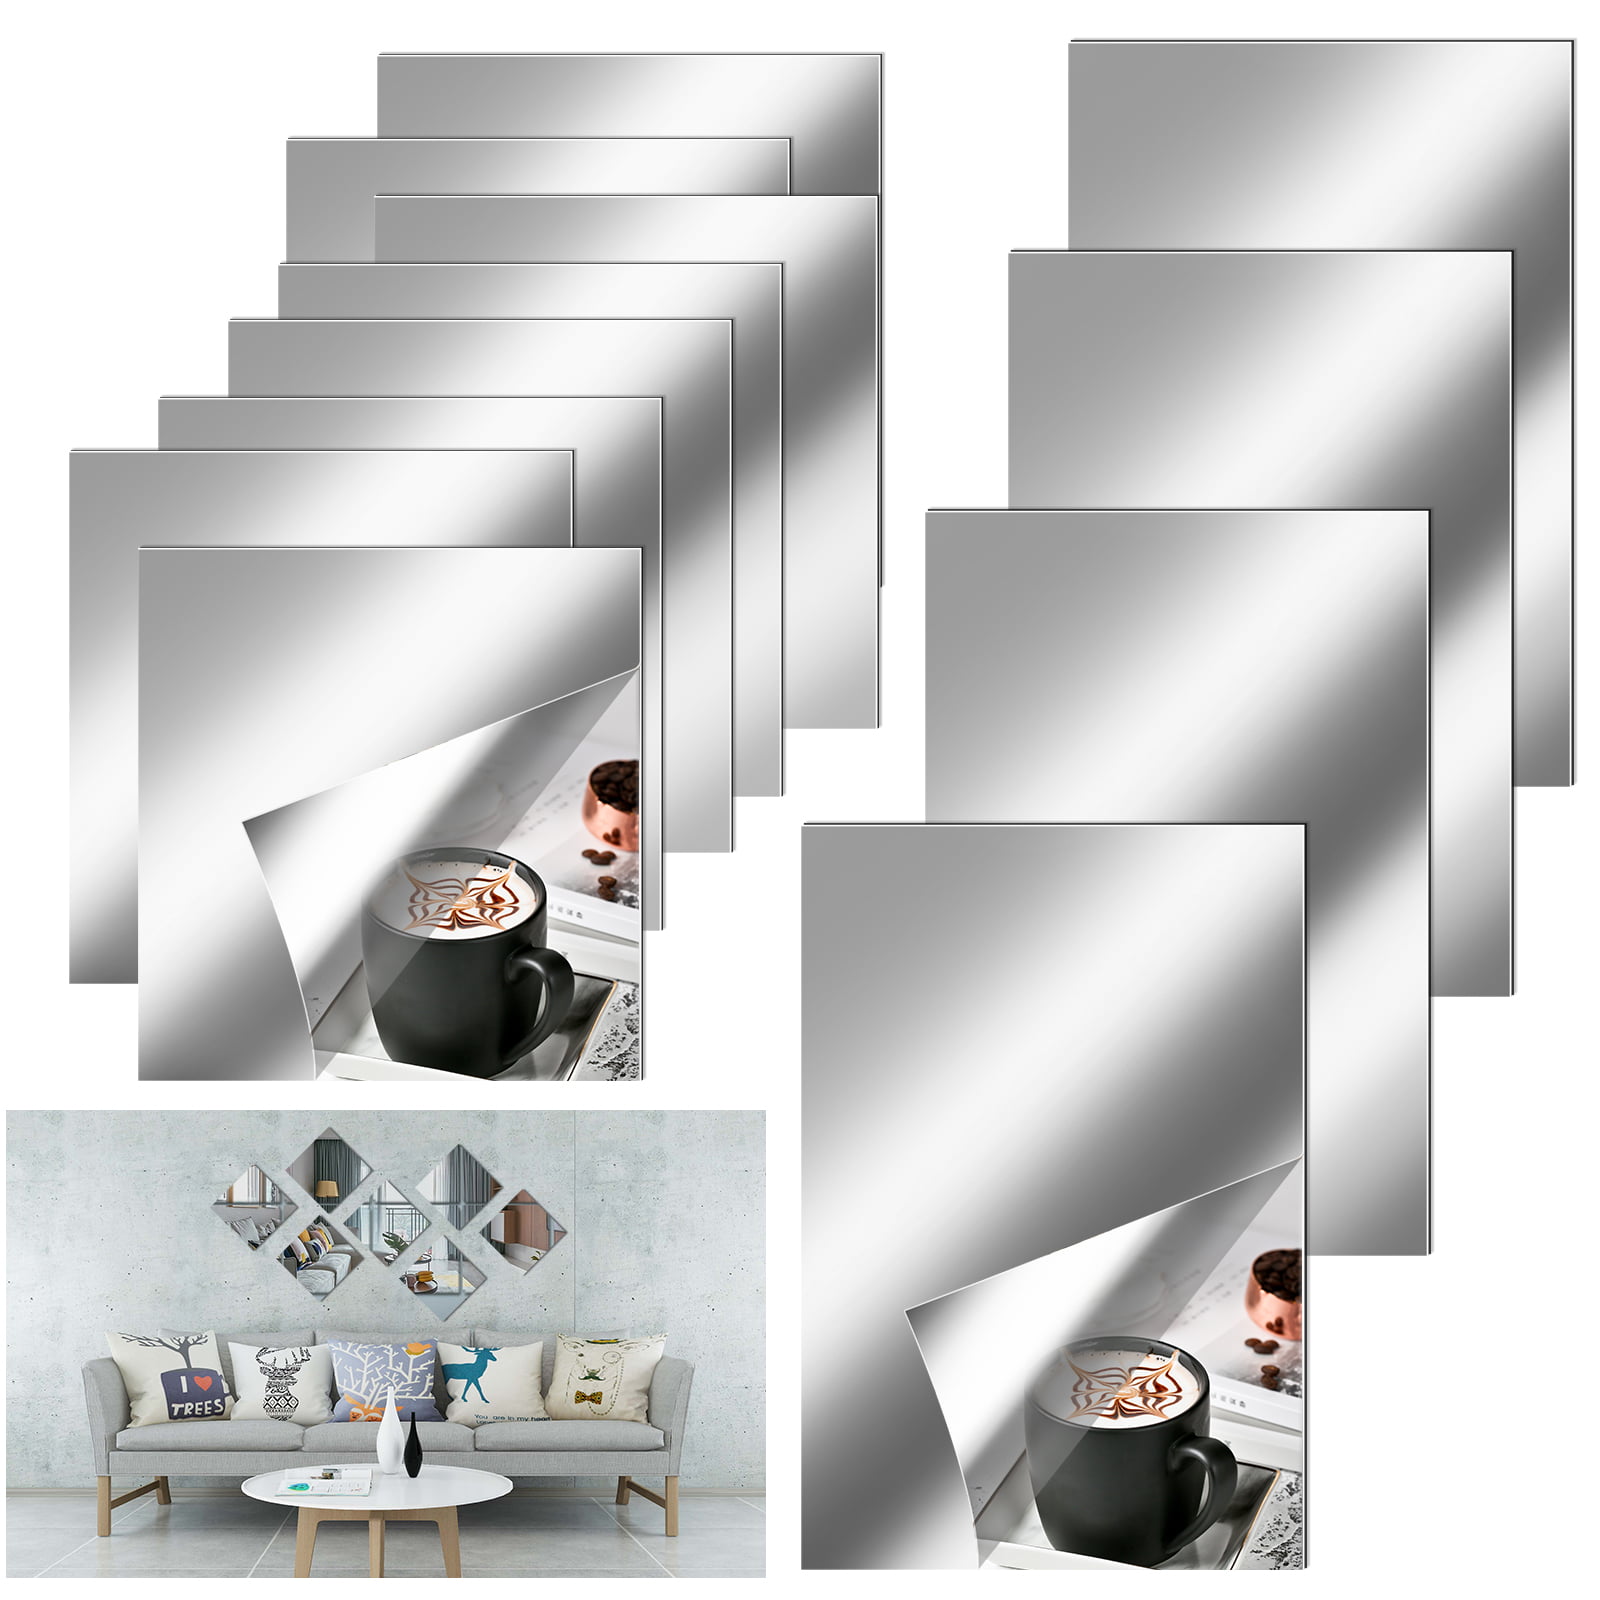 12 Pcs Flexible Mirror Sheets Self Adhesive, Non-Glass Mirror Tiles Mirror  Stickers Plastic DIY Mirror for Home Wall Decor (8pcs 6x6in, 4pcs 9x6in)